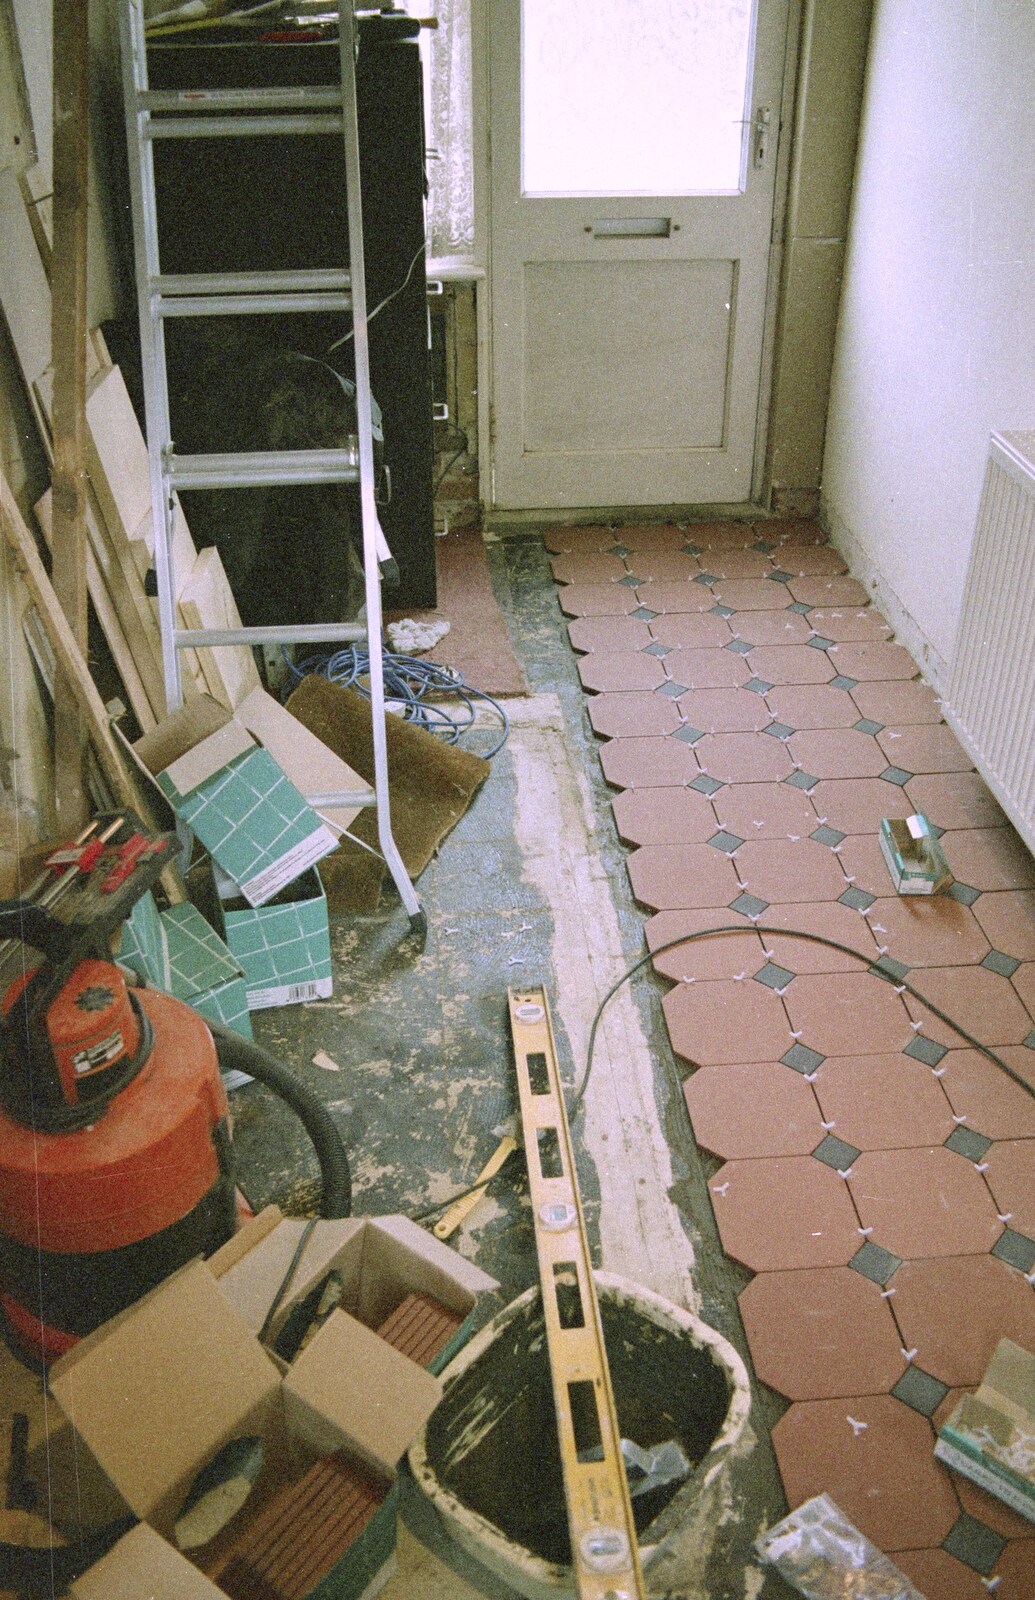 The new tile floor from 3G Lab, and Building a Staircase, Brome, Suffolk - 11th February 2001